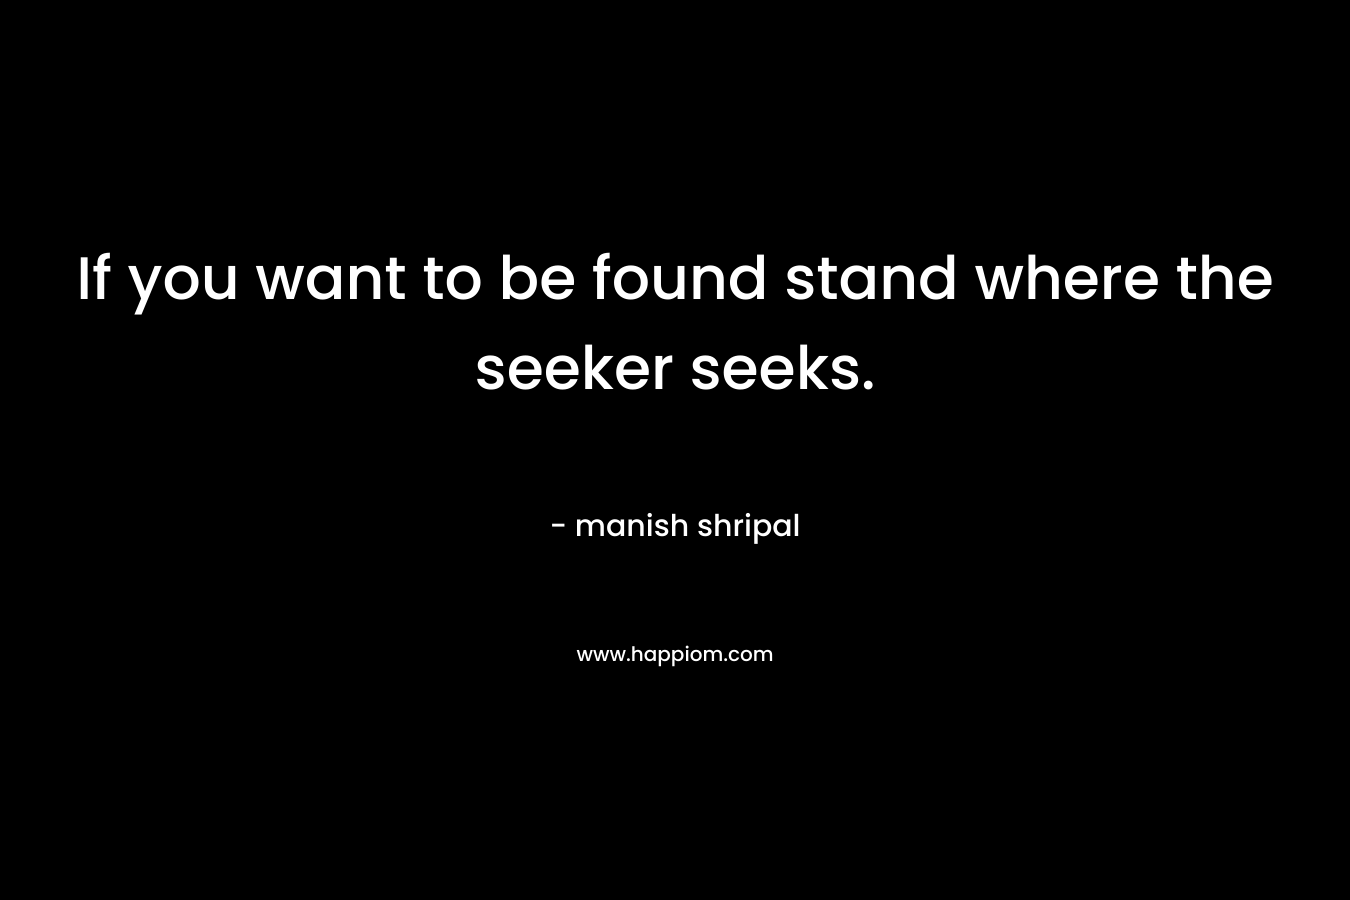 If you want to be found stand where the seeker seeks. – manish shripal